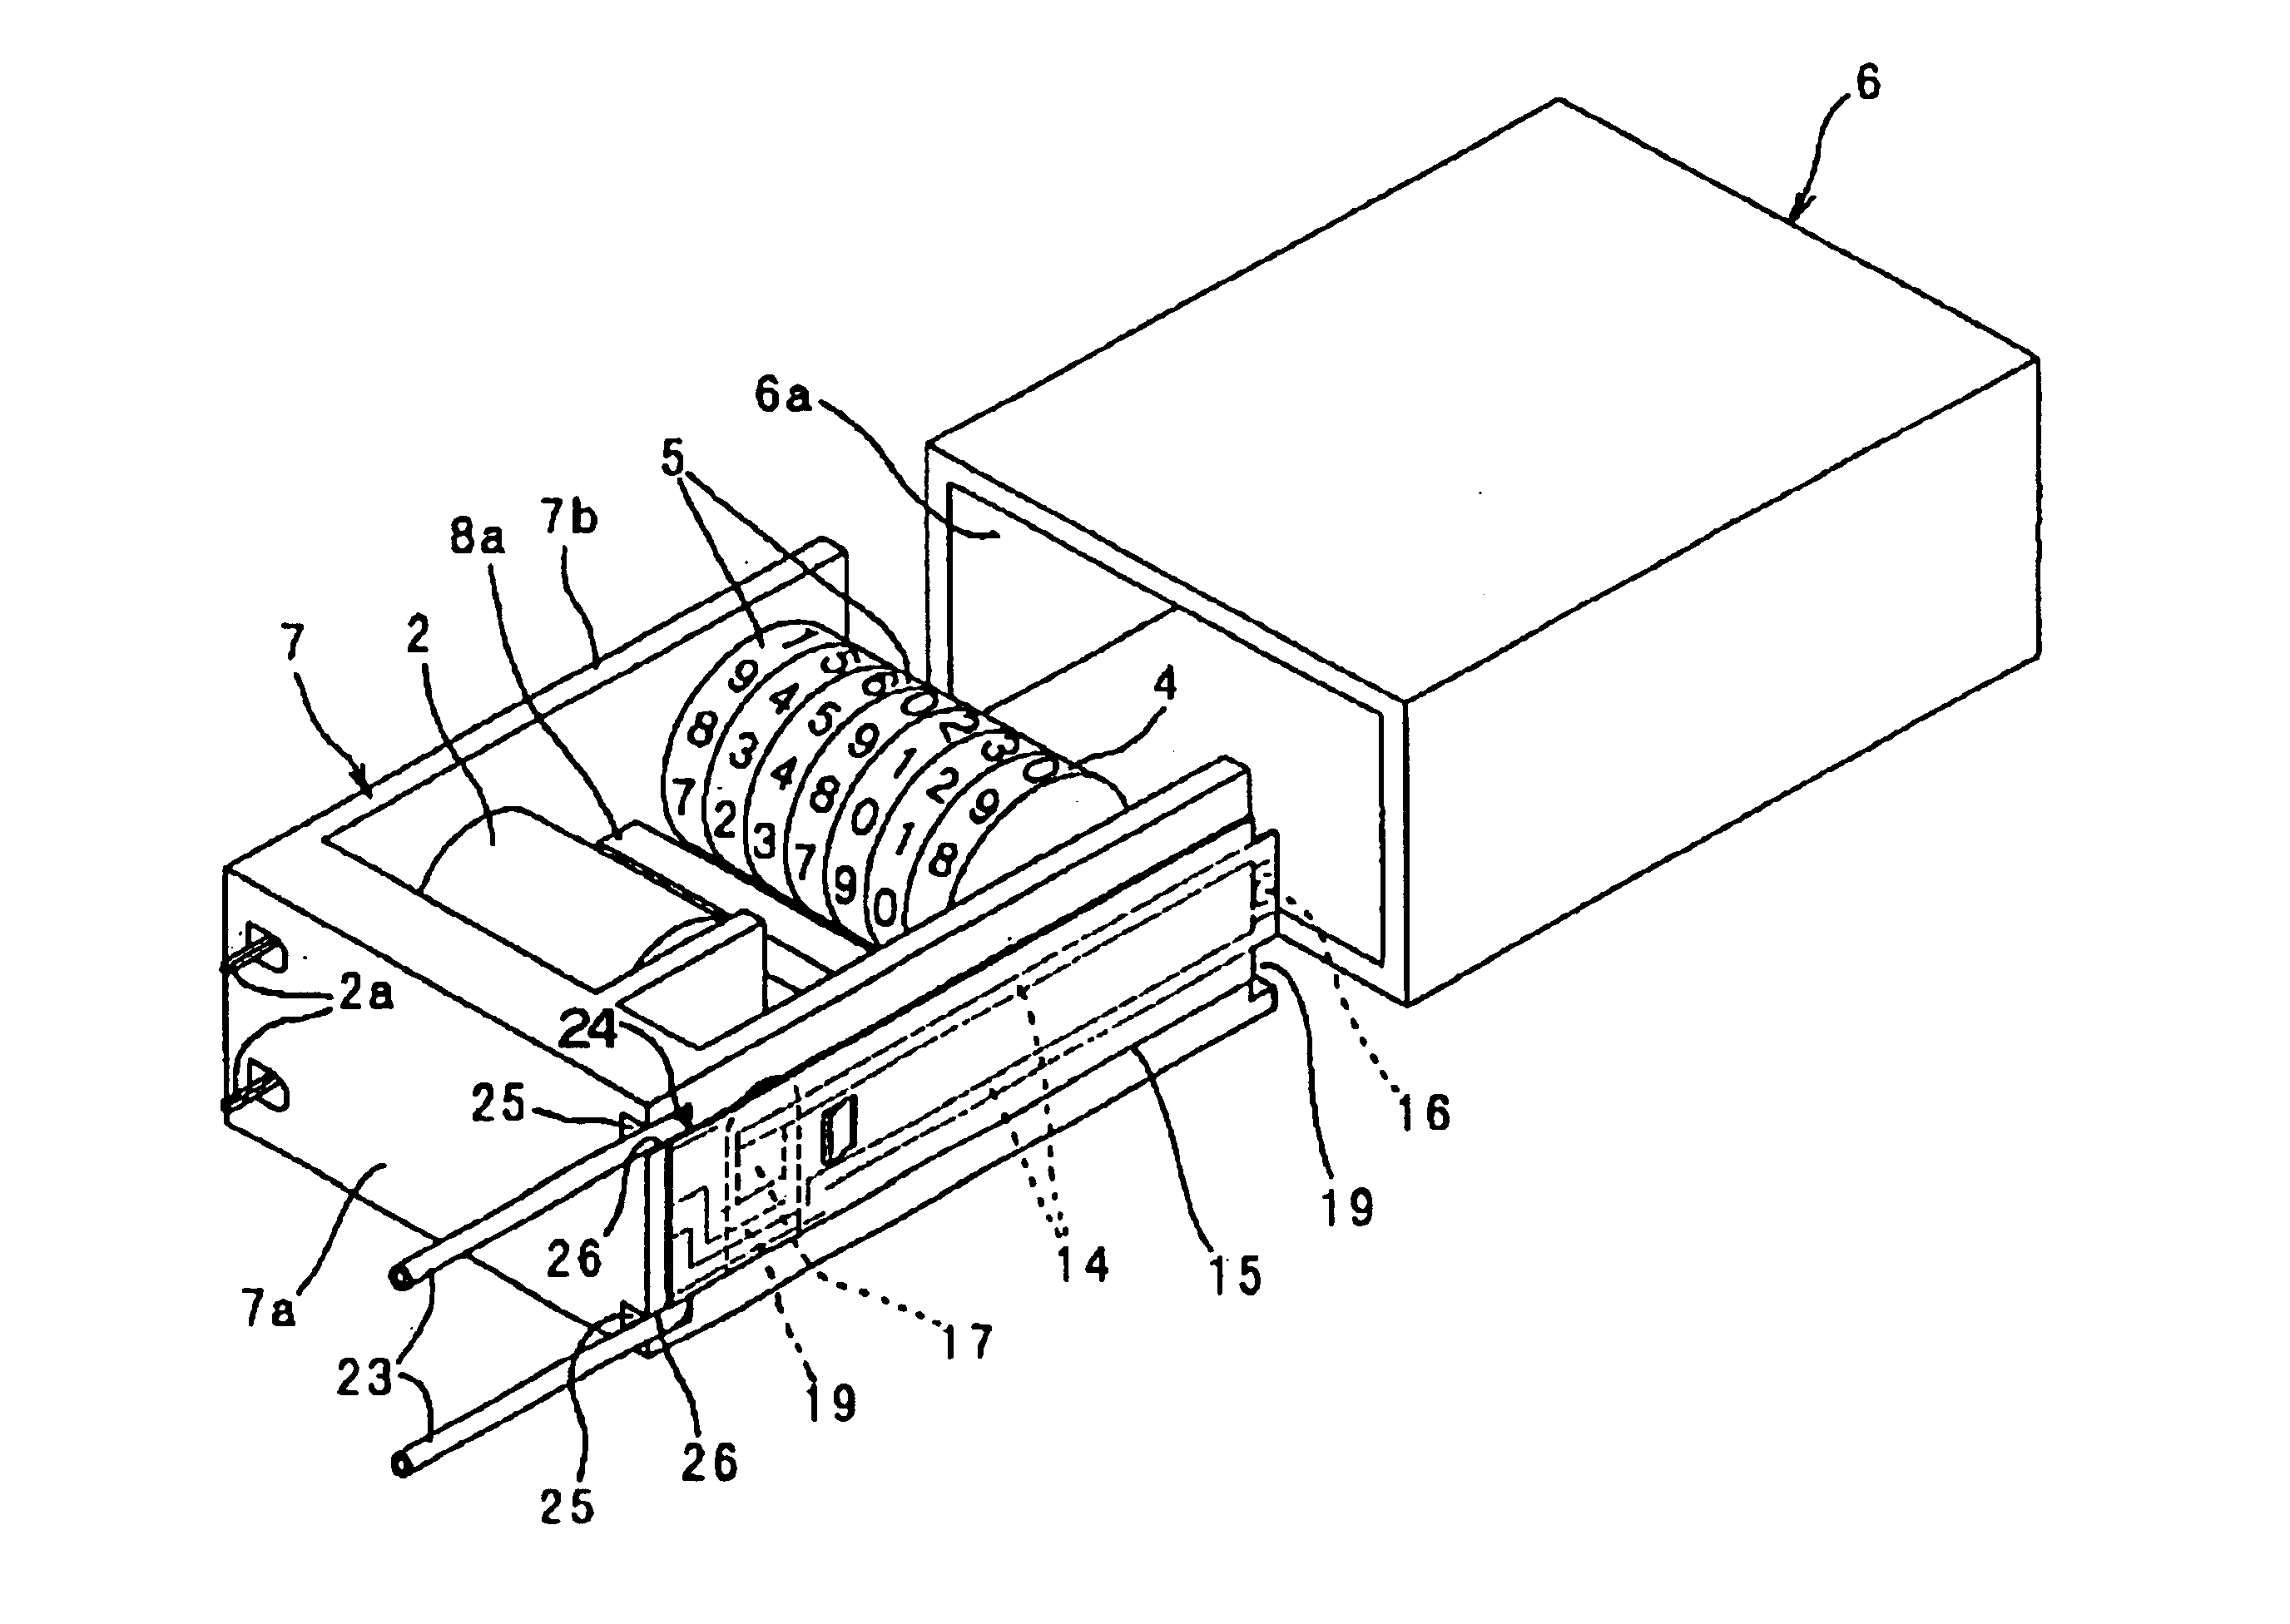 Electromagnetic counter with built-in illumination device